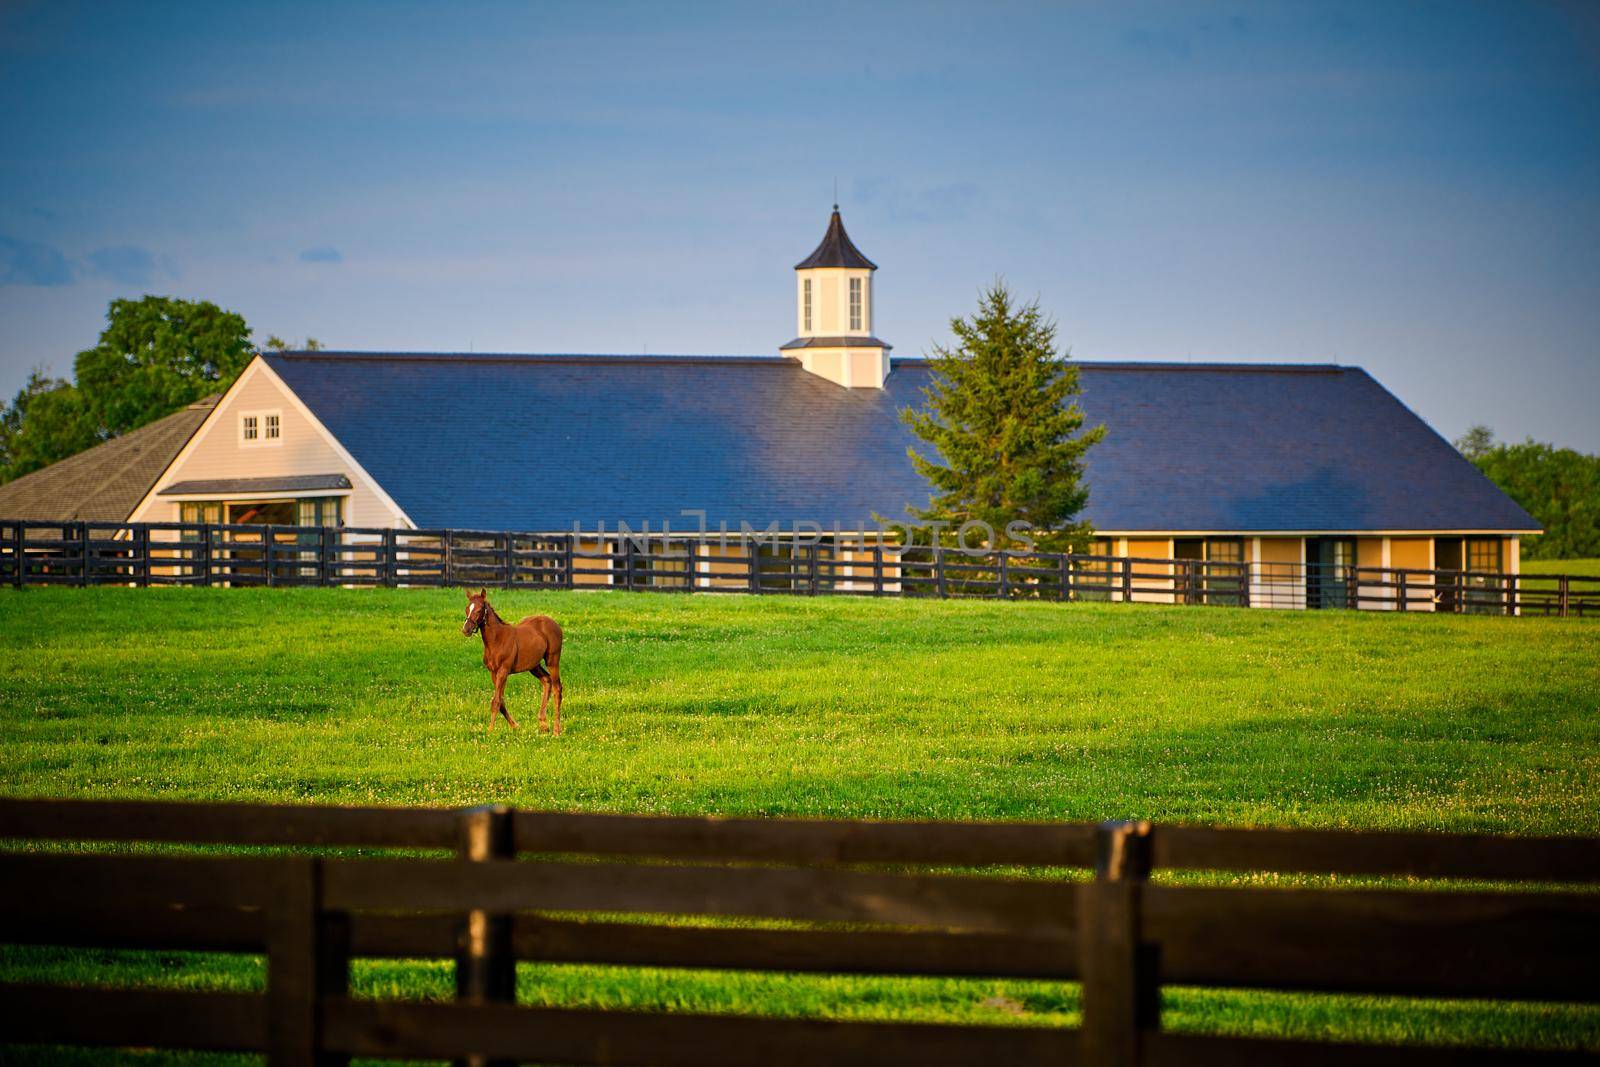 Young thoroughbred foal in a field with horse barn in the background.